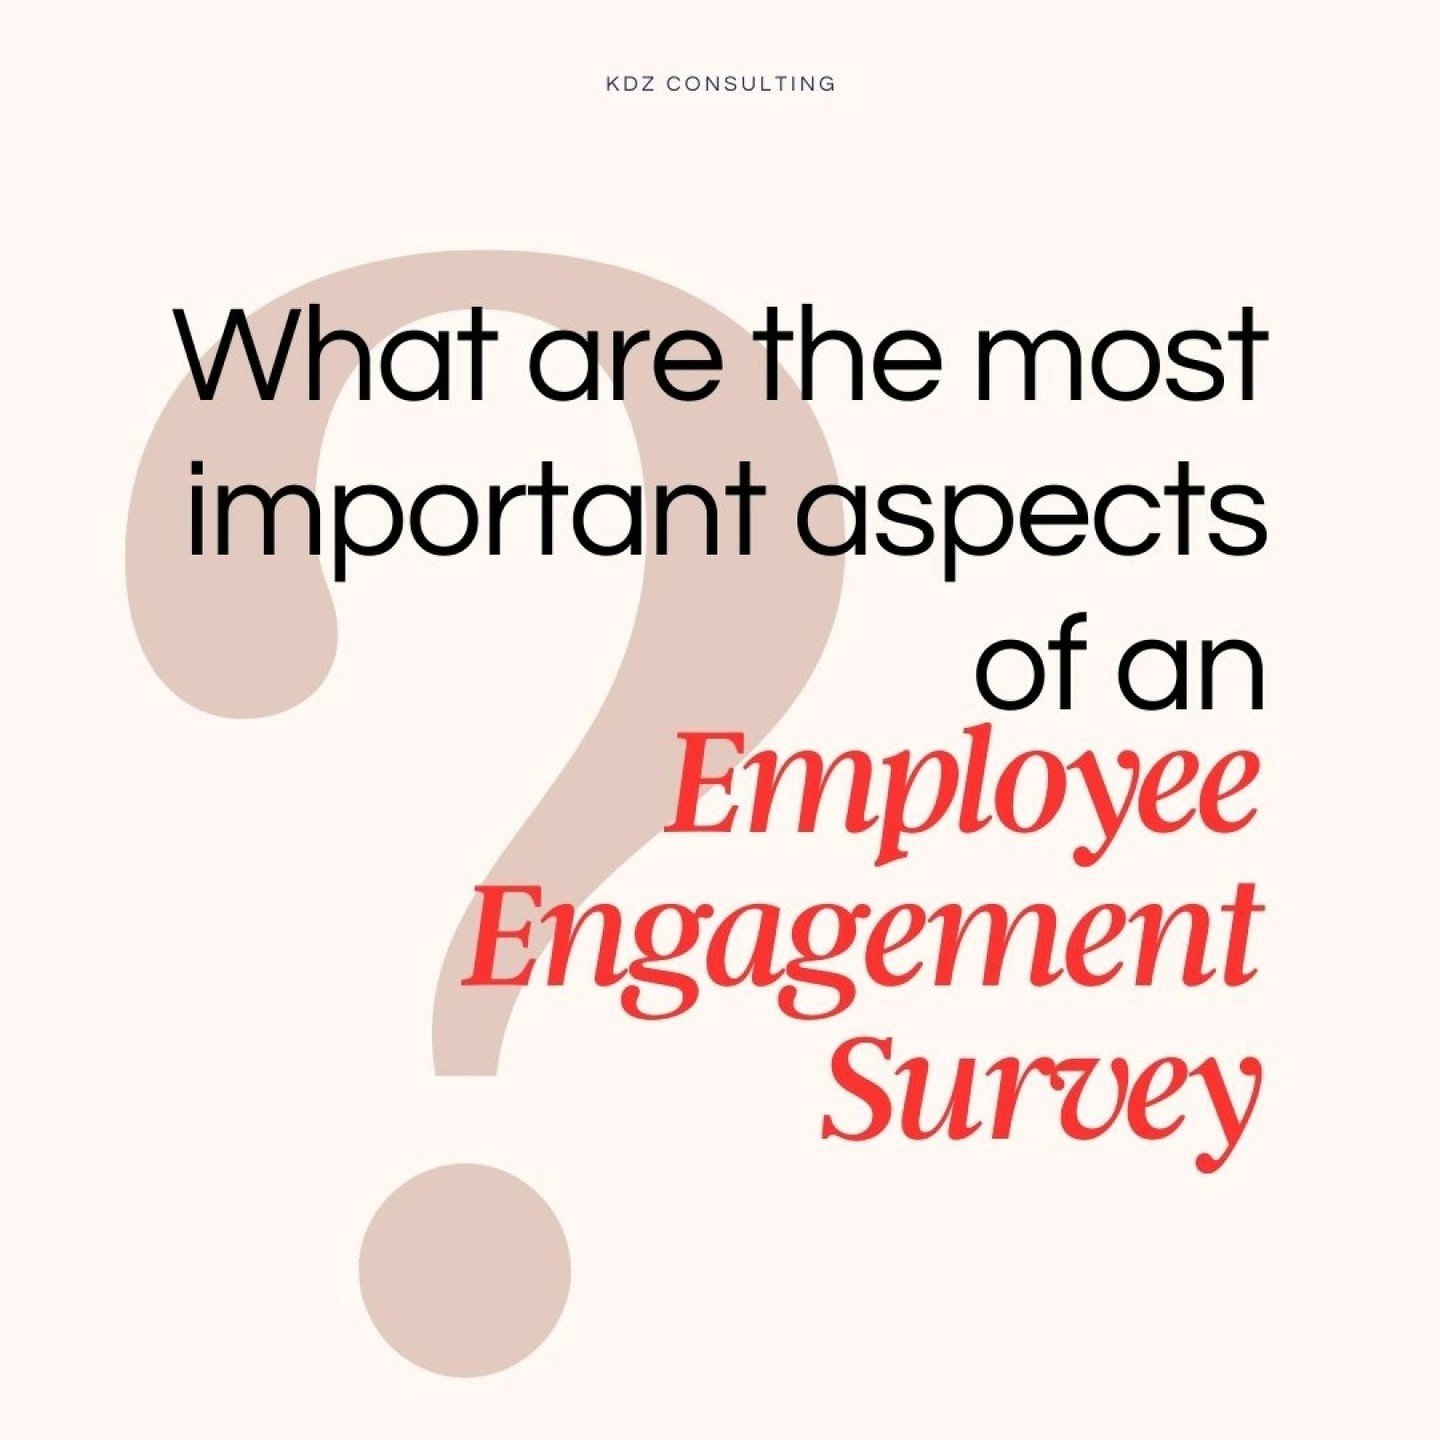 📣 Hey there business leaders! Are you looking to improve your employee engagement? 🤔 Look no further! 💡

One of the most effective ways to understand your employees' needs is through Employee Engagement Surveys. 📝 However, it's not just about ask